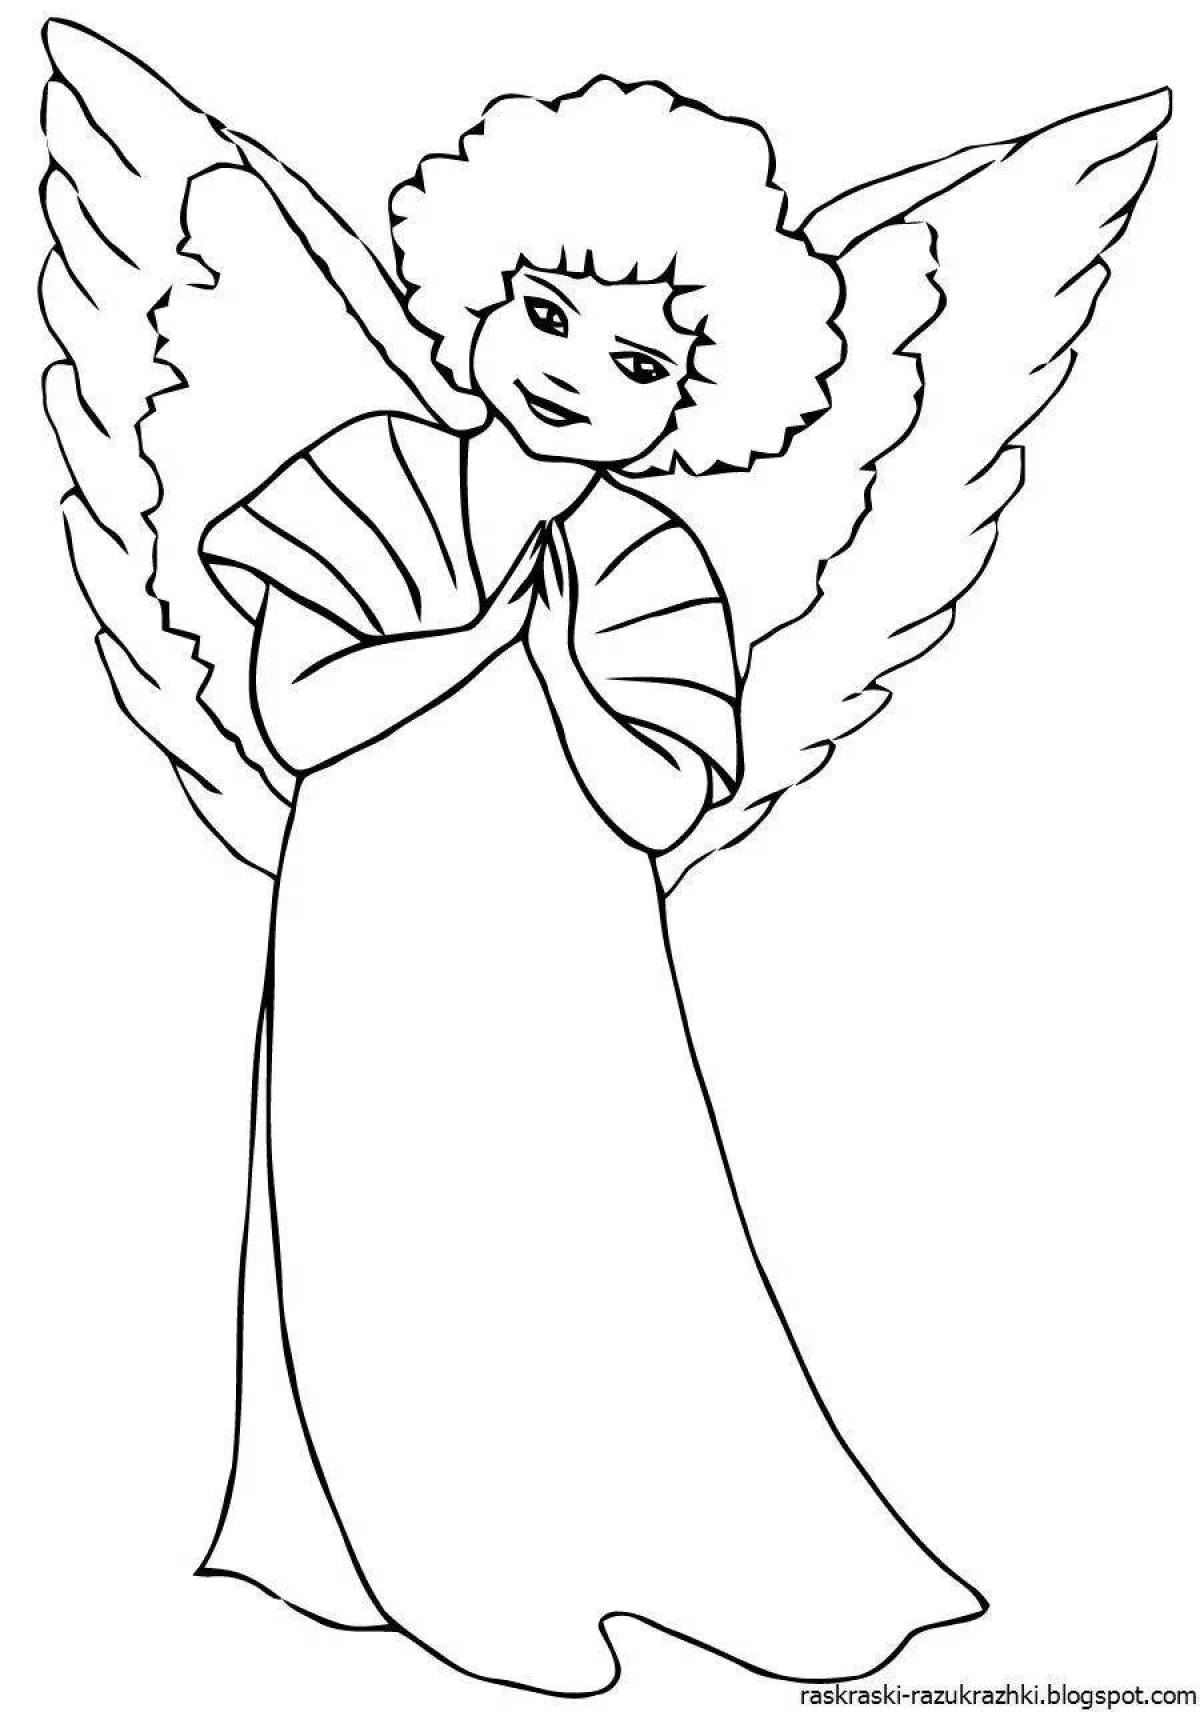 Coloring page divine little angel